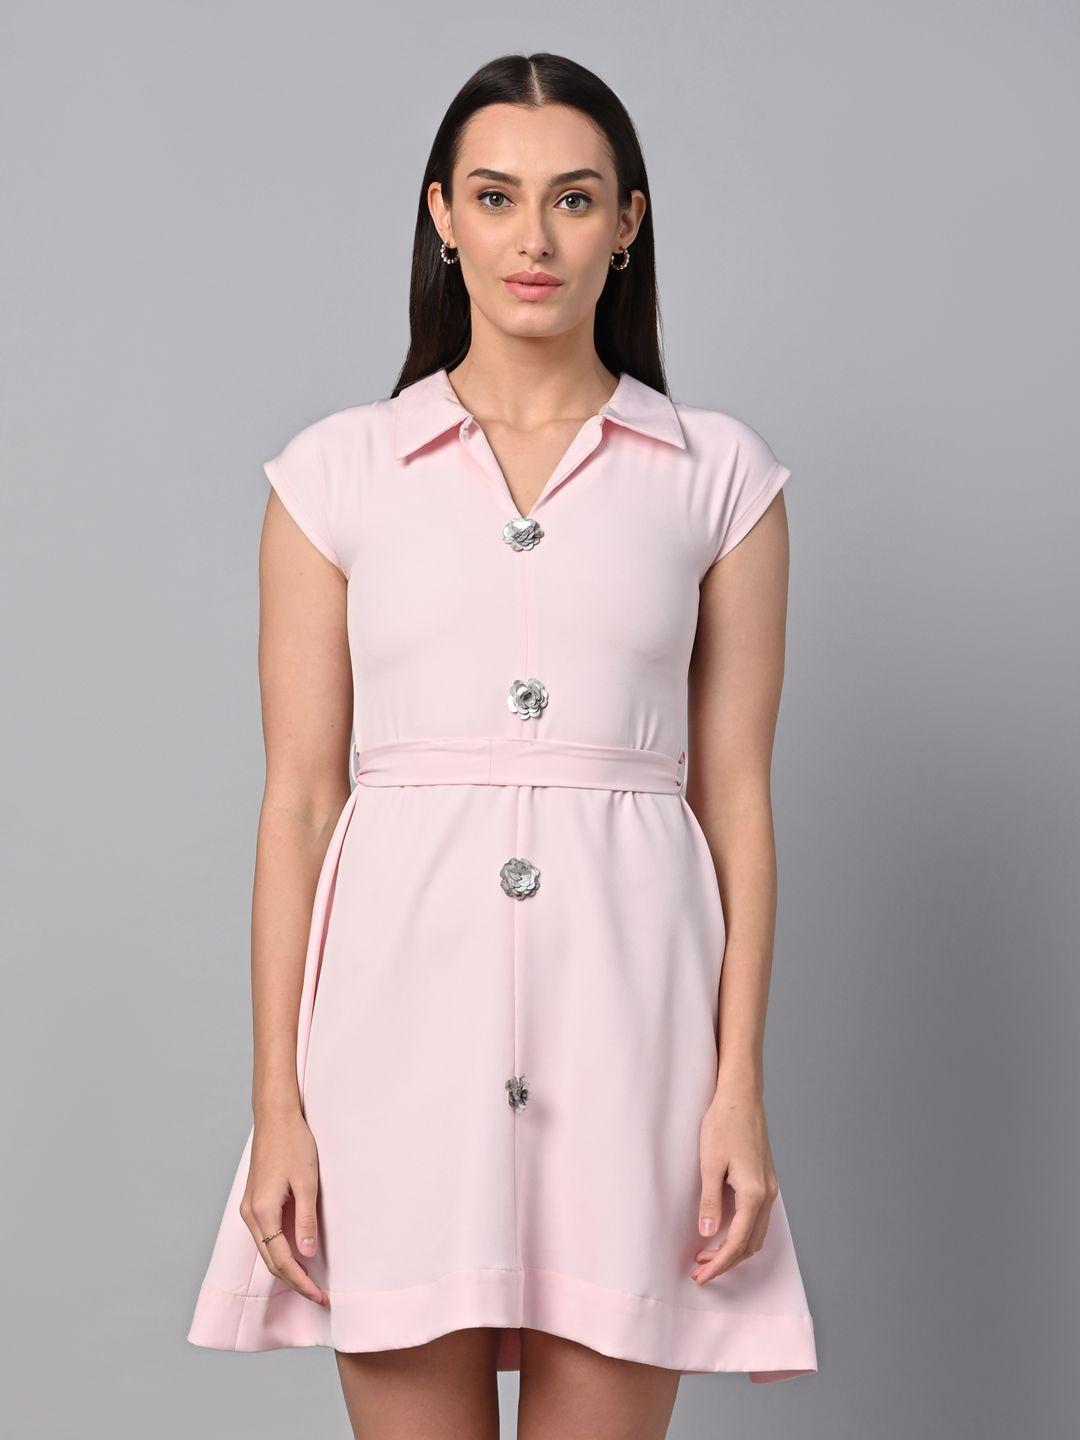 justin whyte shirt collar extended sleeves belted a-line dress